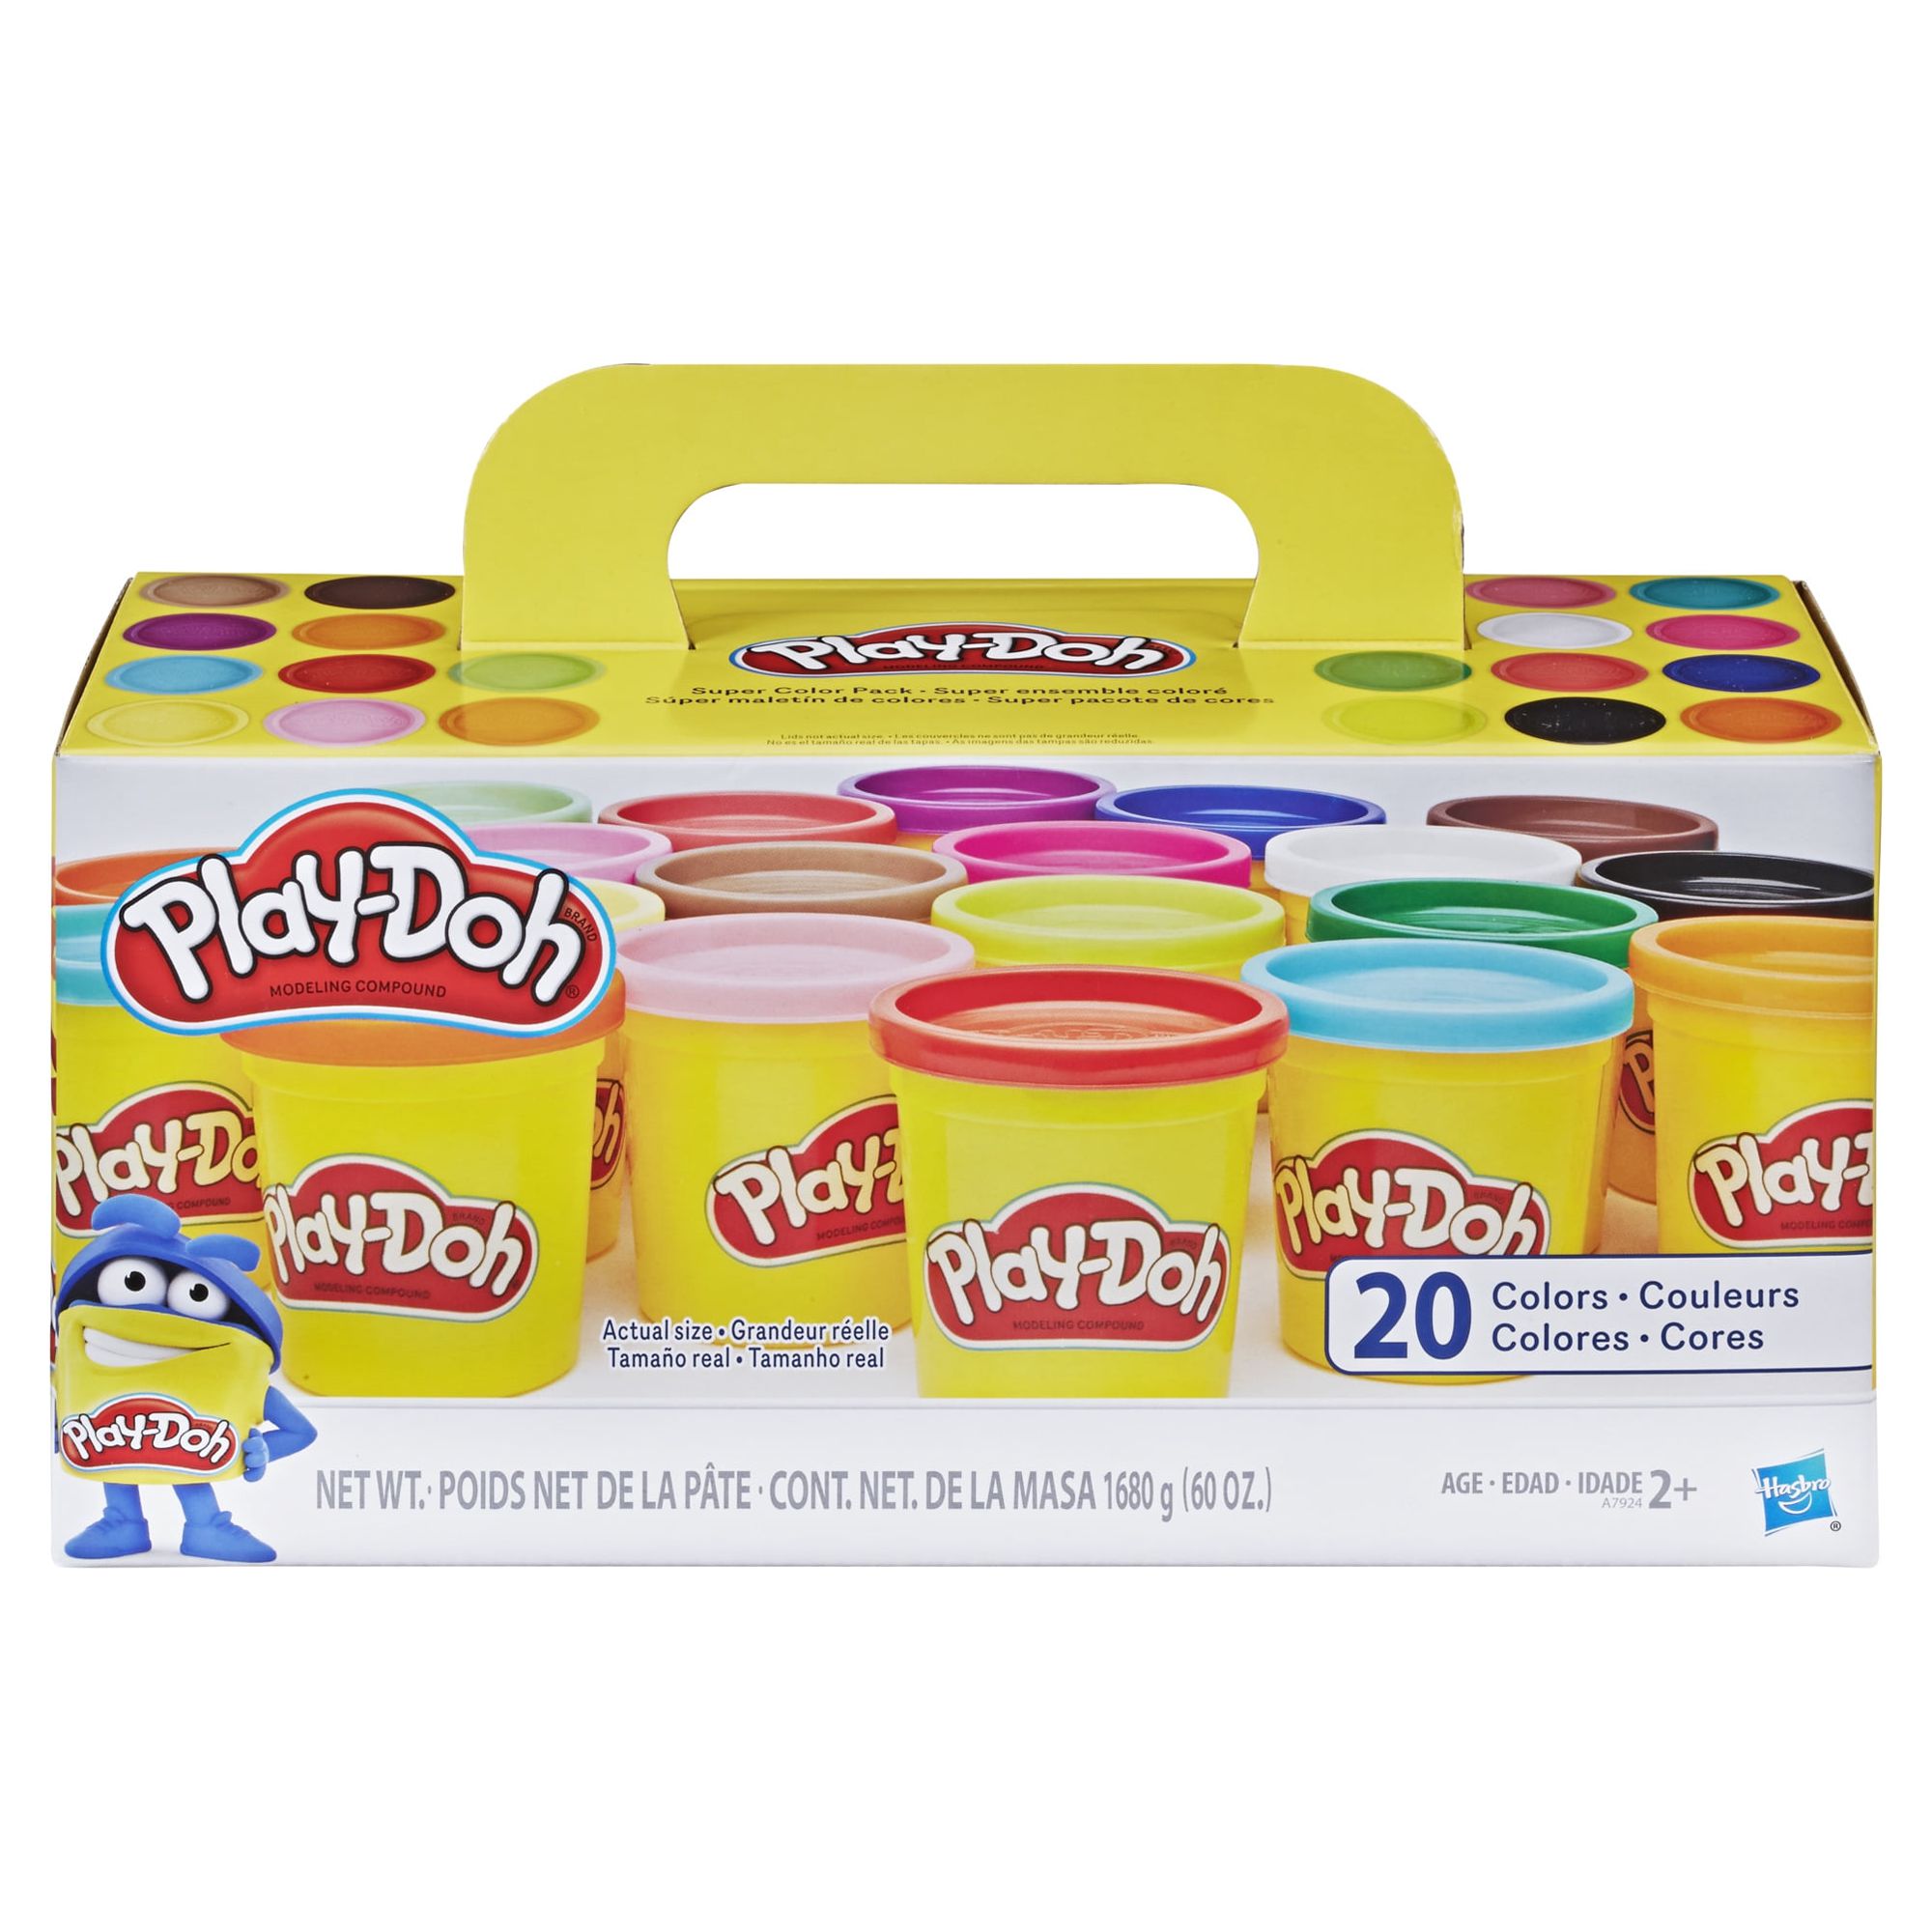 Play-Doh Super Color 20-Pack of 3-Ounce Cans, Kids Toys, Arts and Crafts for Kids - image 1 of 4